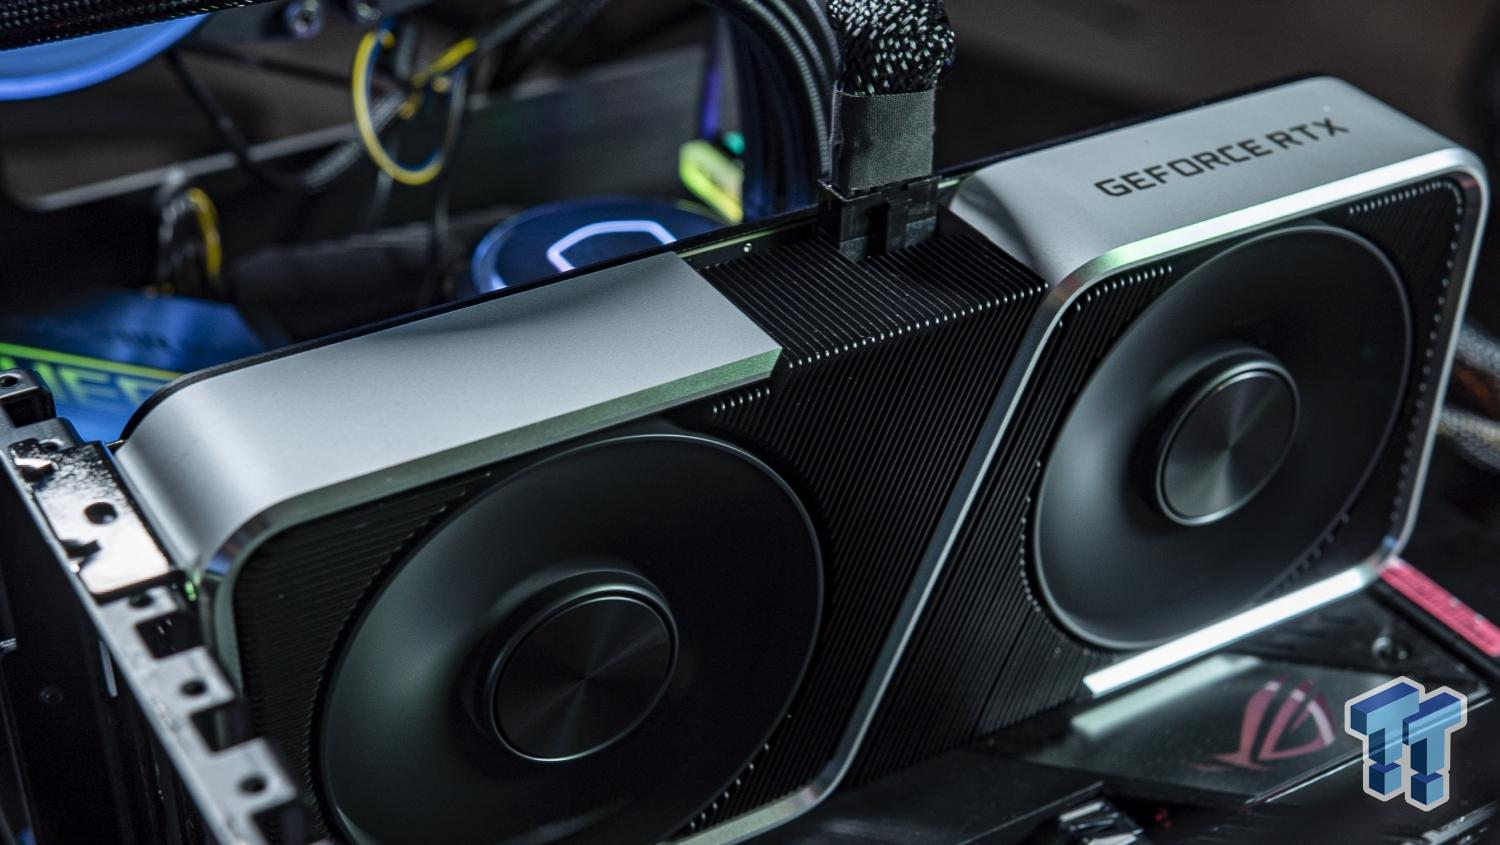 GeForce RTX 3060 Ti Out Now: Faster Than RTX 2080 SUPER, Starting At $399, GeForce News